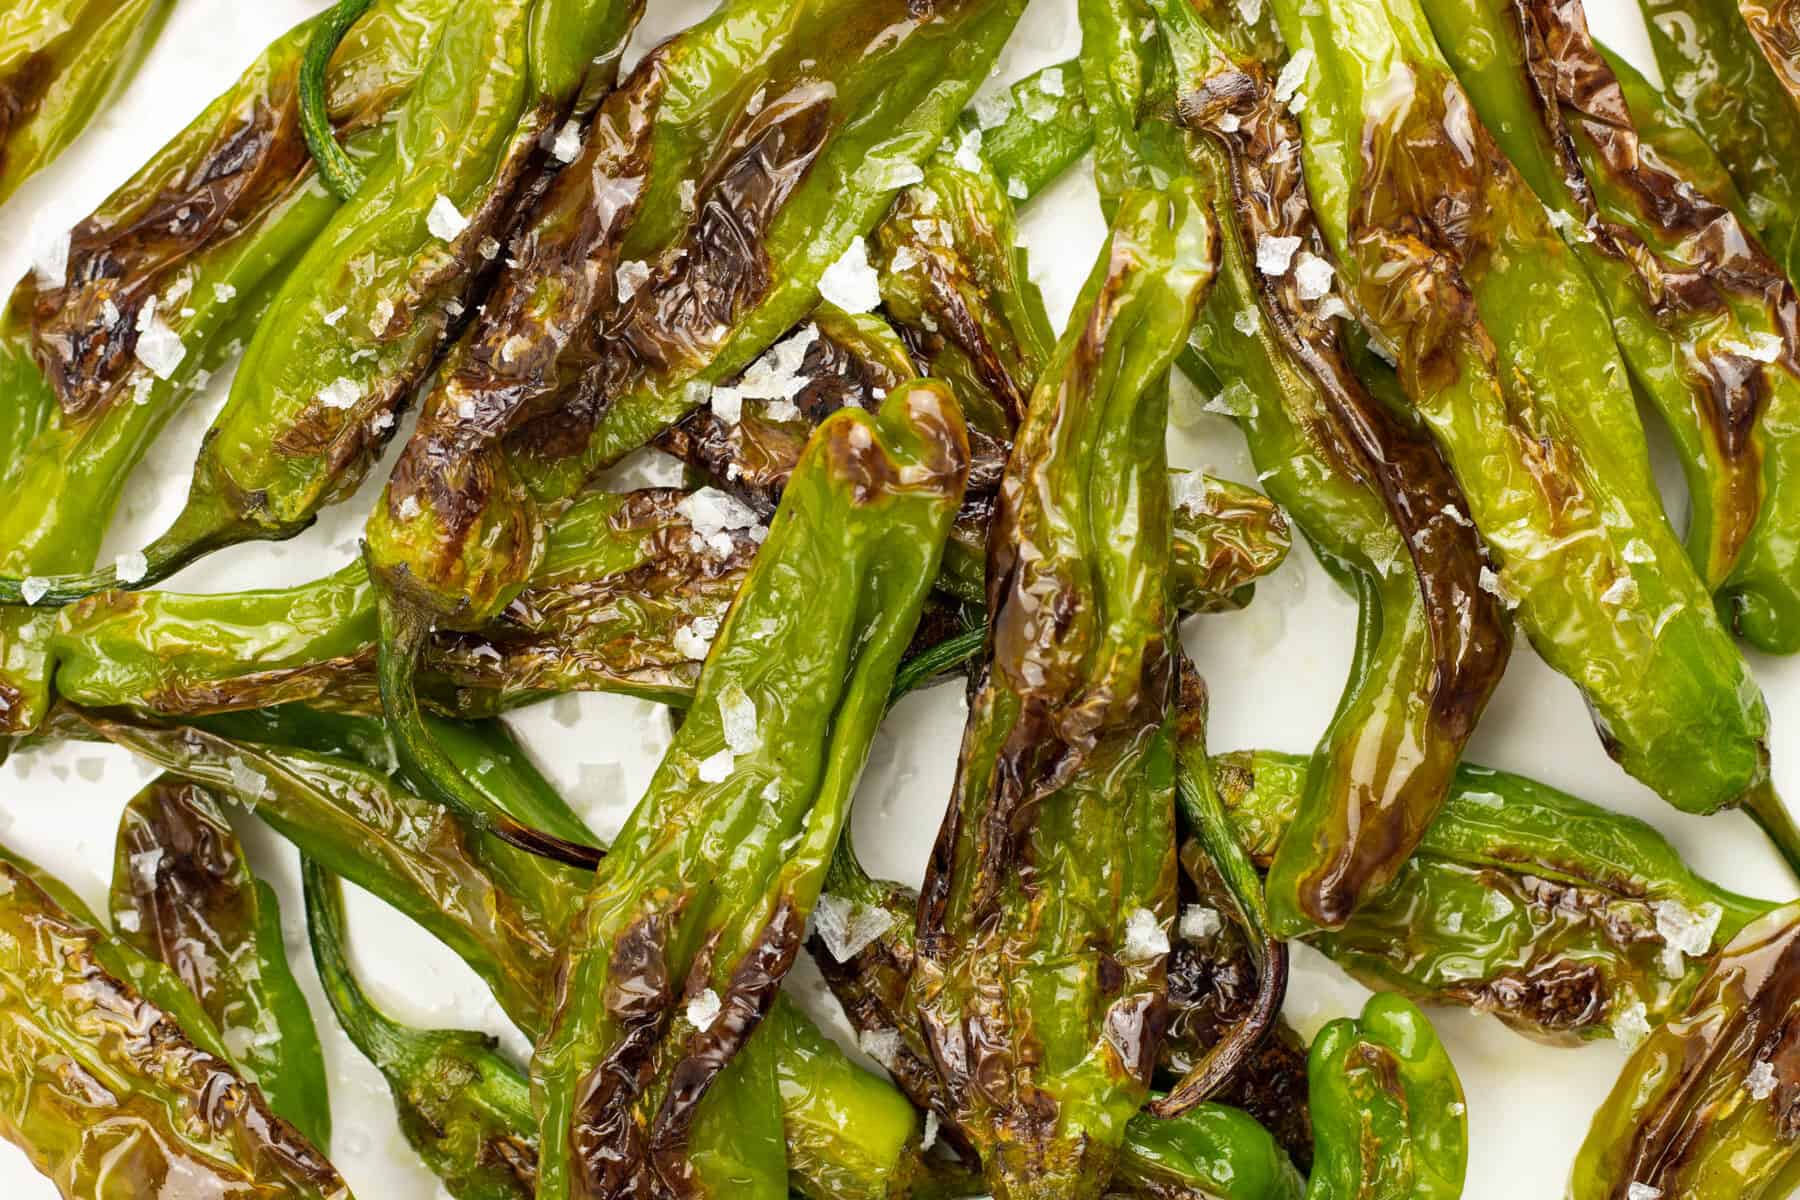 Shishito peppers that have been blistered covered in sea salt.